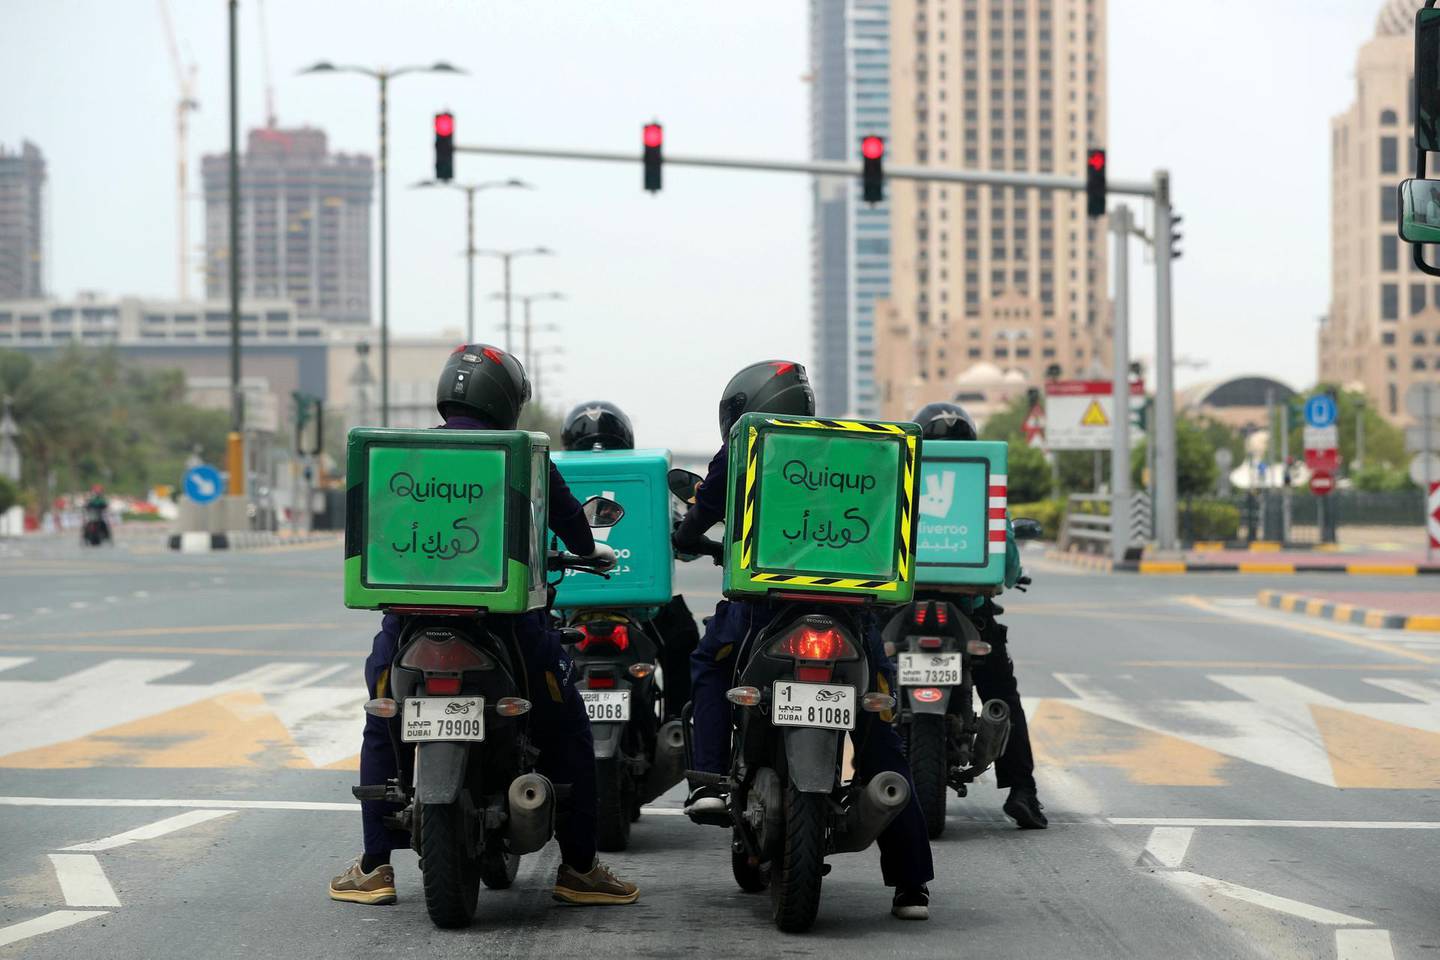 Dubai, United Arab Emirates - Reporter: N/A: Coronavirus. Delivery drivers wait at a red light during the 24hr lockdown due to Covid-19. Tuesday, April 14th, 2020. Dubai. Chris Whiteoak / The National